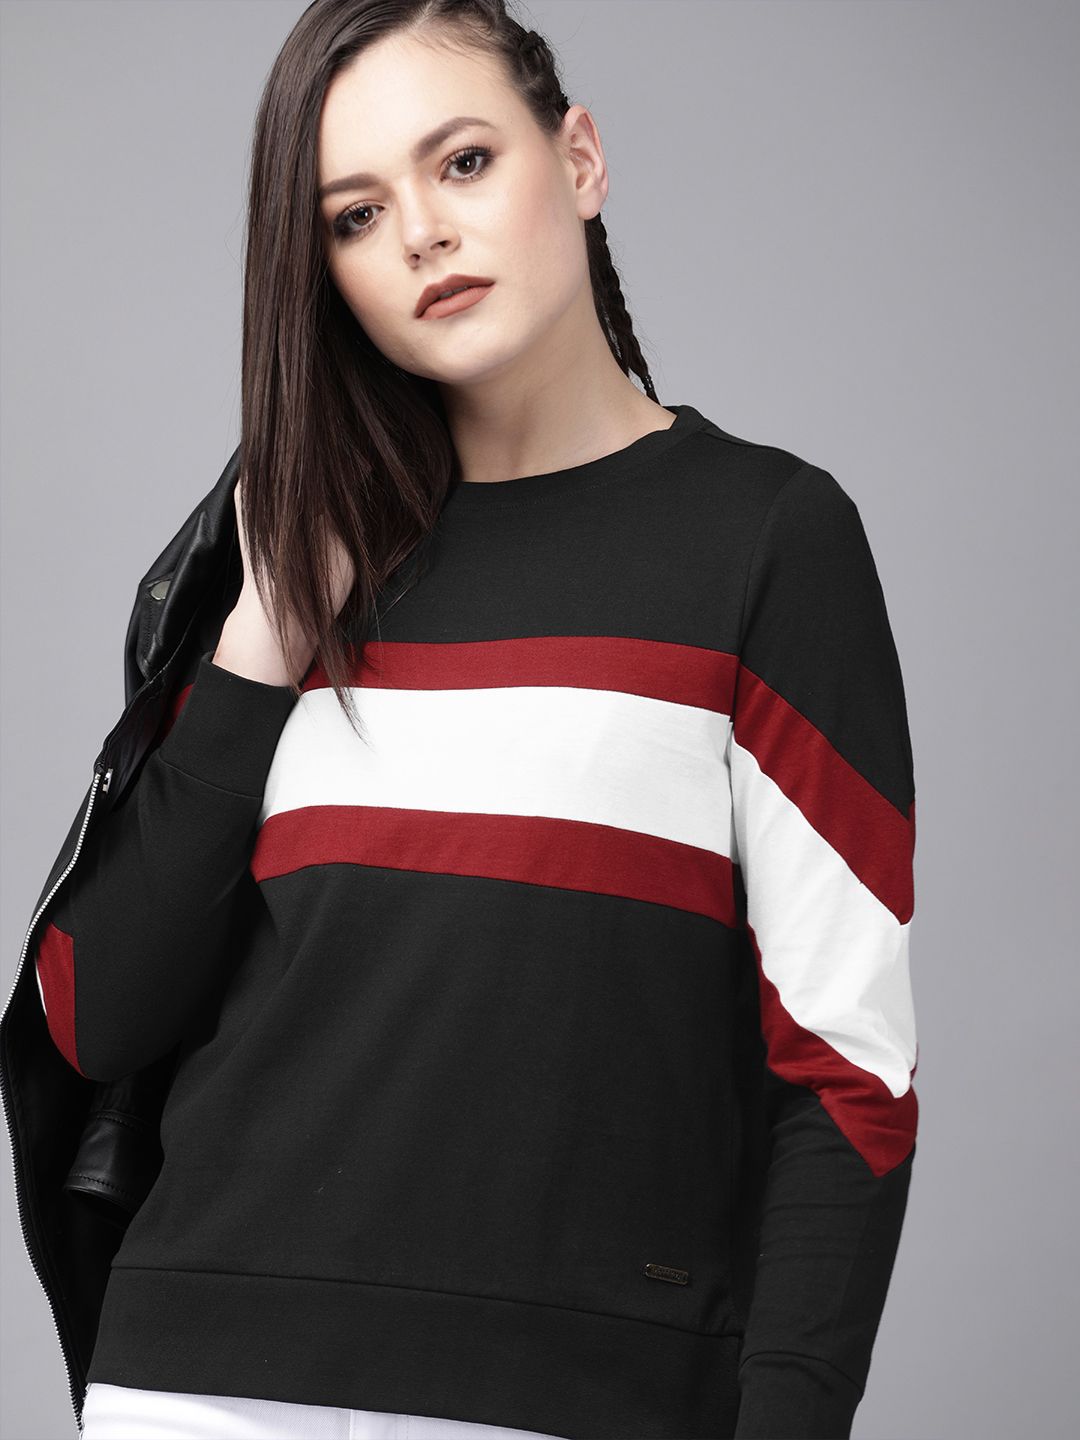 The Roadster Lifestyle Co Women Black  White Colourblocked Round Neck Pure Cotton T-shirt Price in India